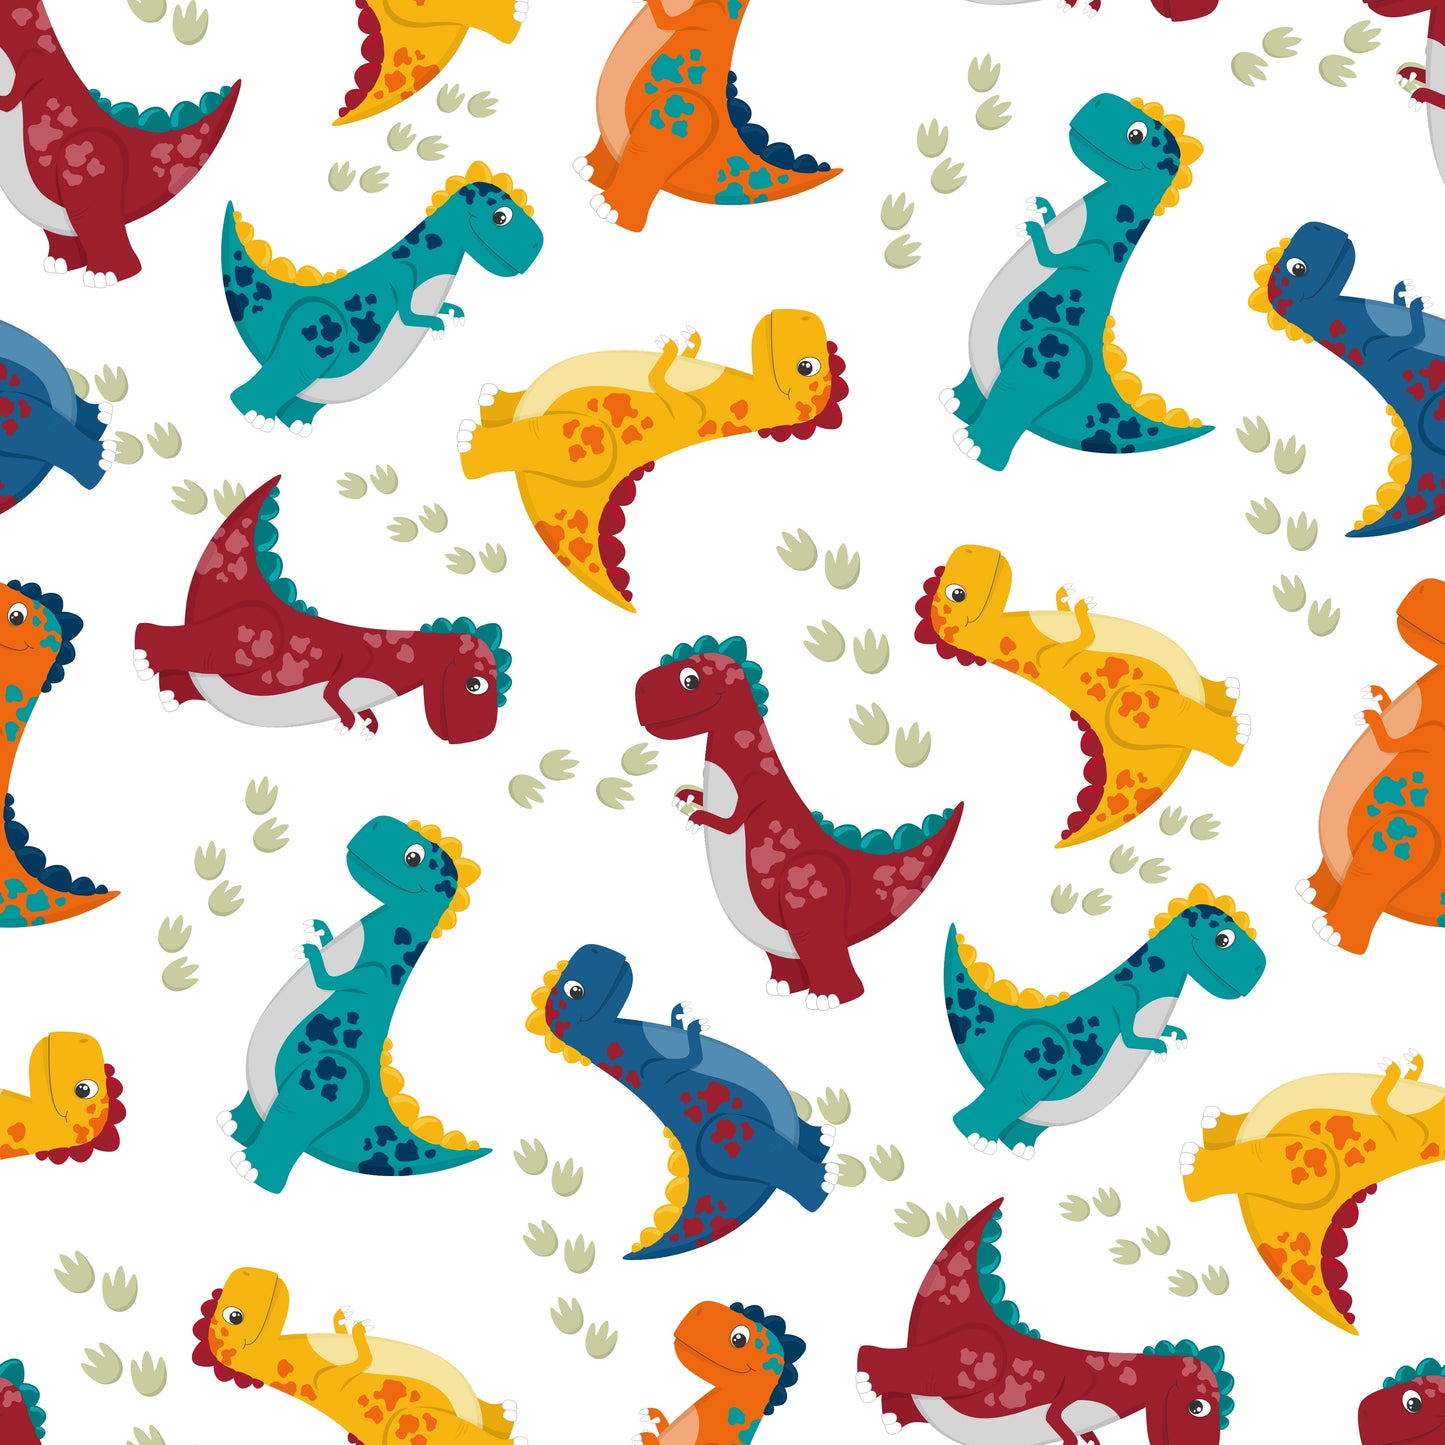 Dinosaurs with Footprints (Faux Leather - 8" x 13" Printed Sheet)